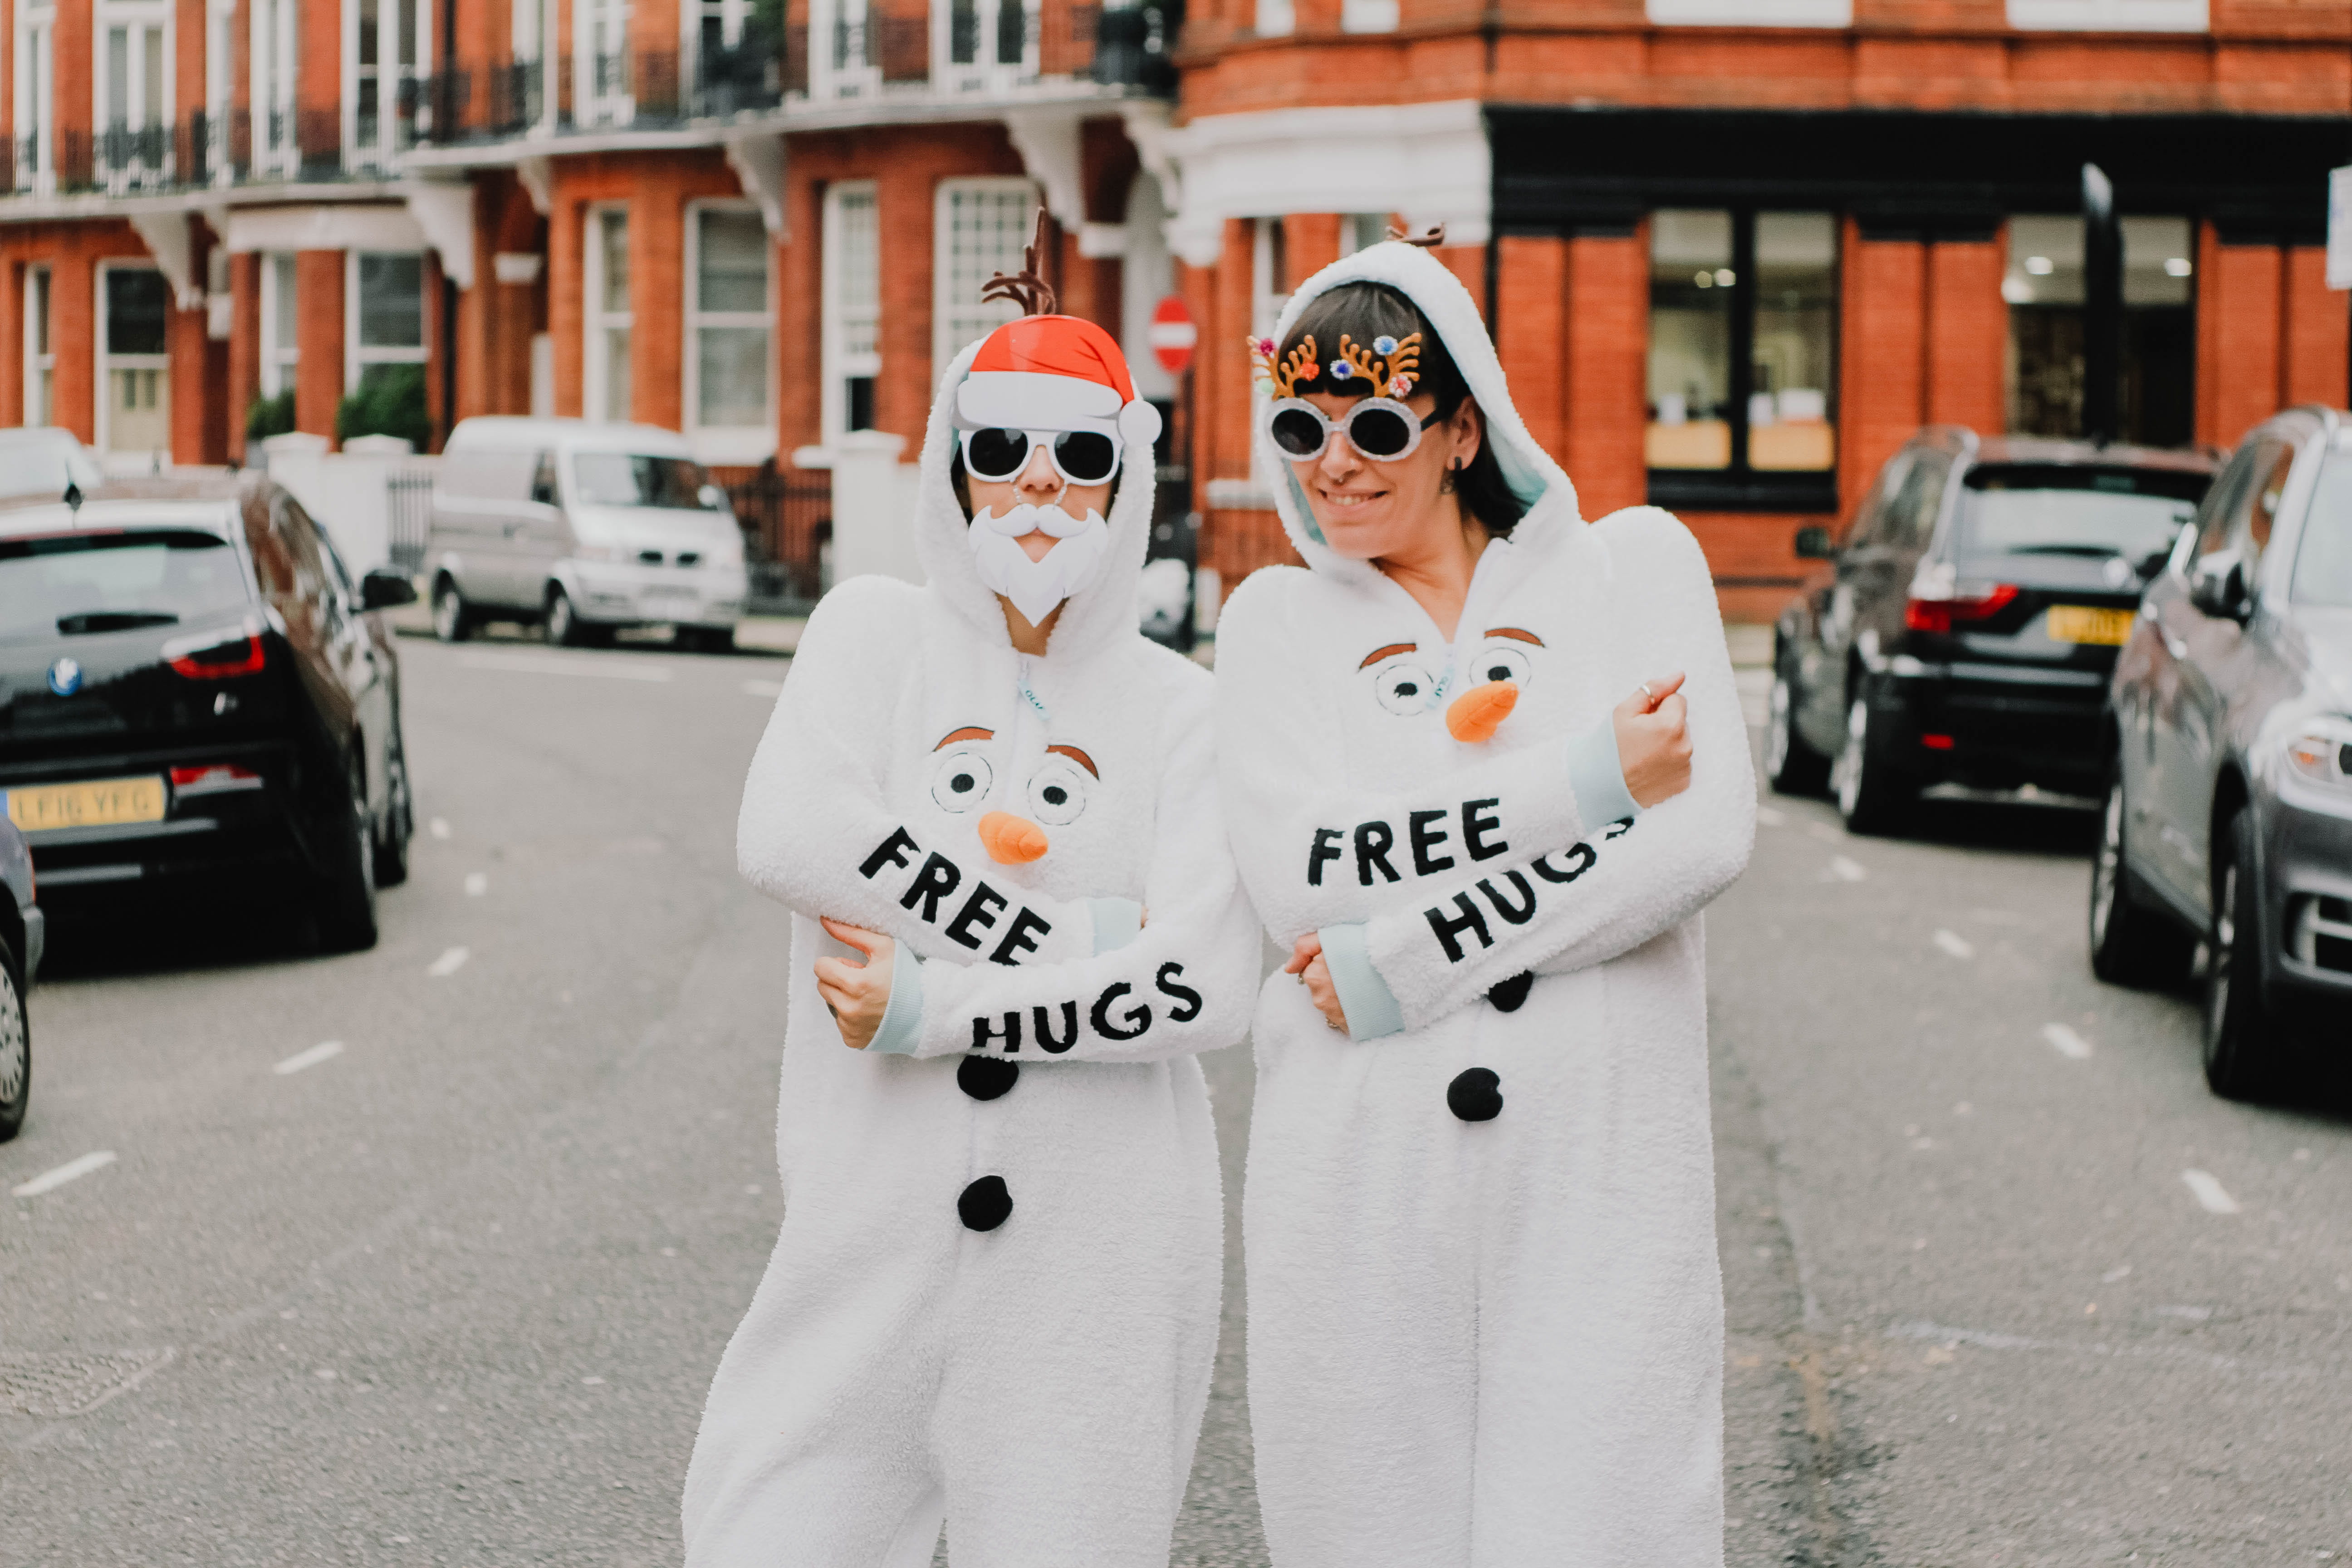 two women wearing coveralls standing next to each other, two persons wearing snowman costumes